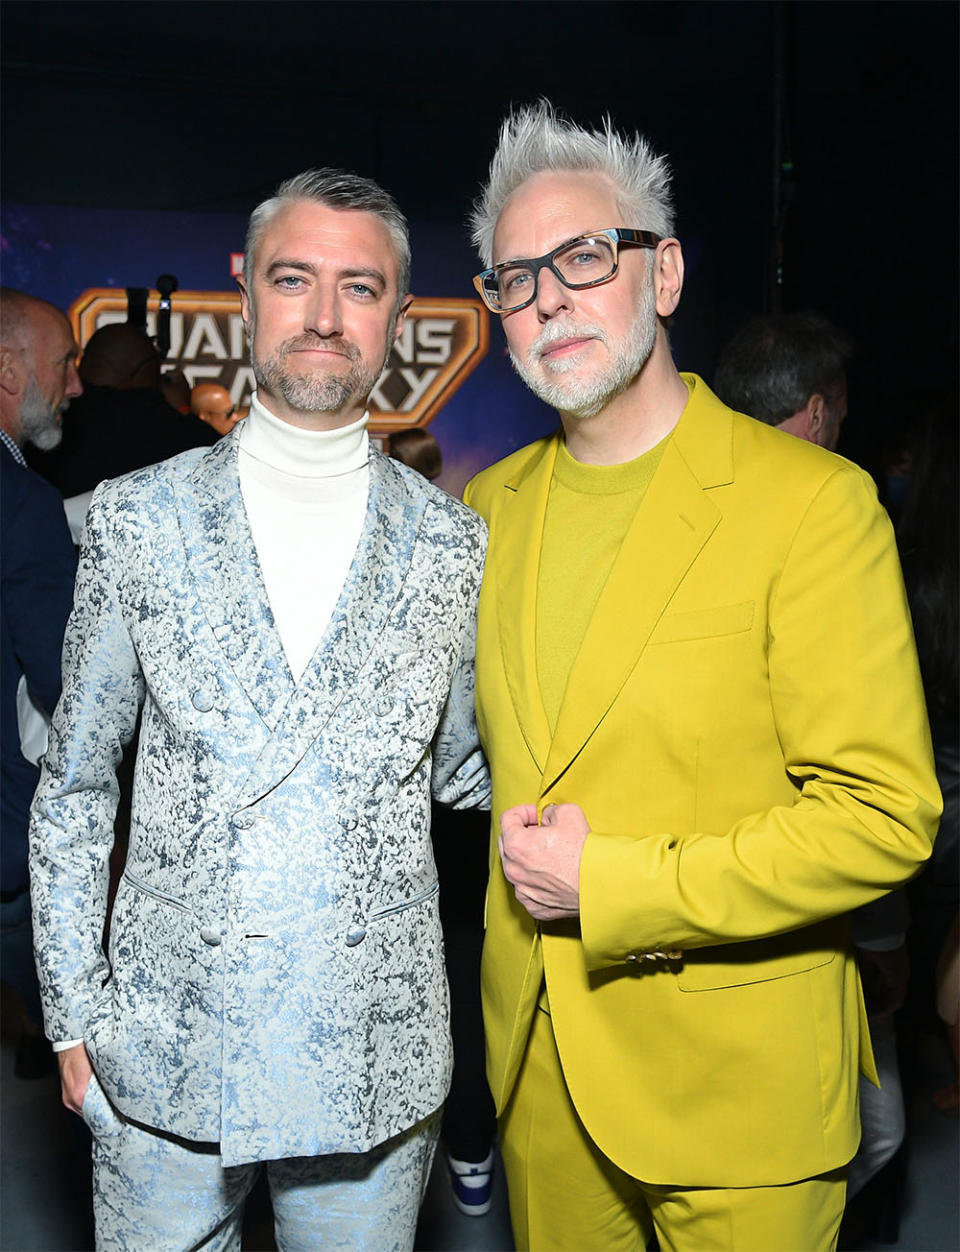 Sean Gunn and James Gunn attend the Guardians of the Galaxy Vol. 3 World Premiere at the Dolby Theatre in Hollywood, California on April 27, 2023.